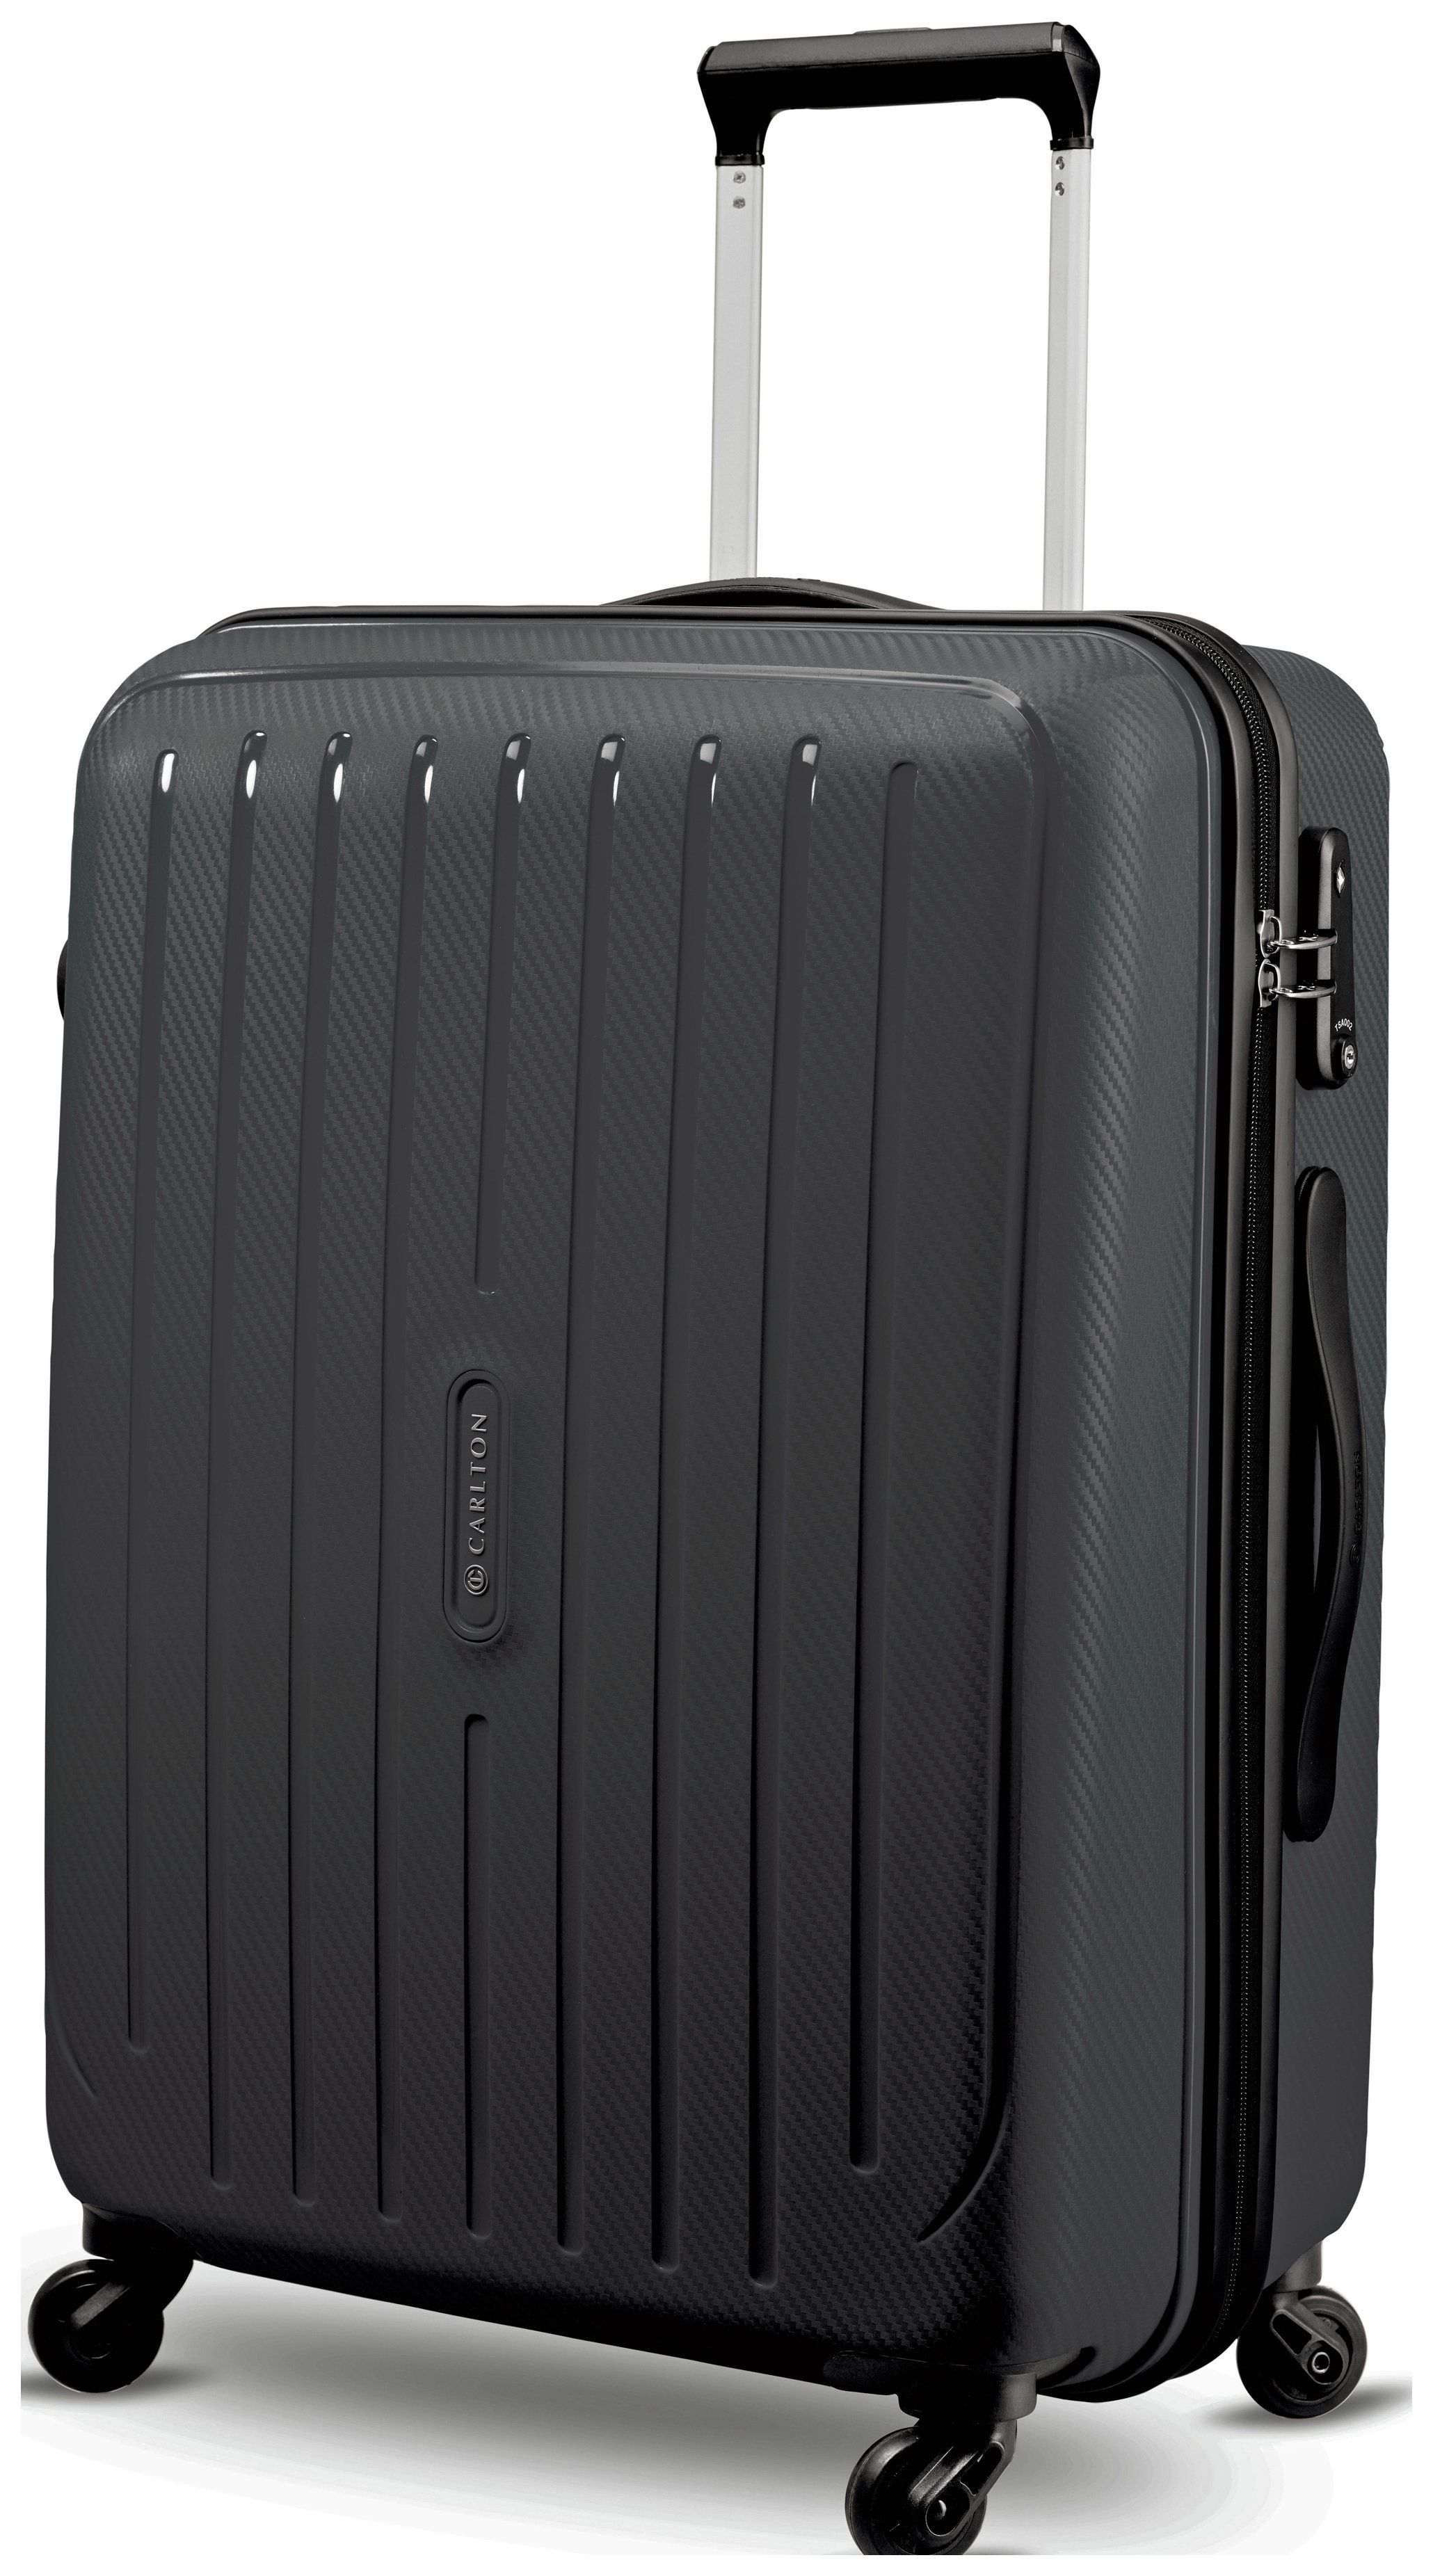 Buy Suitcases at Argos.co.uk - Your Online Shop for Sports and leisure.